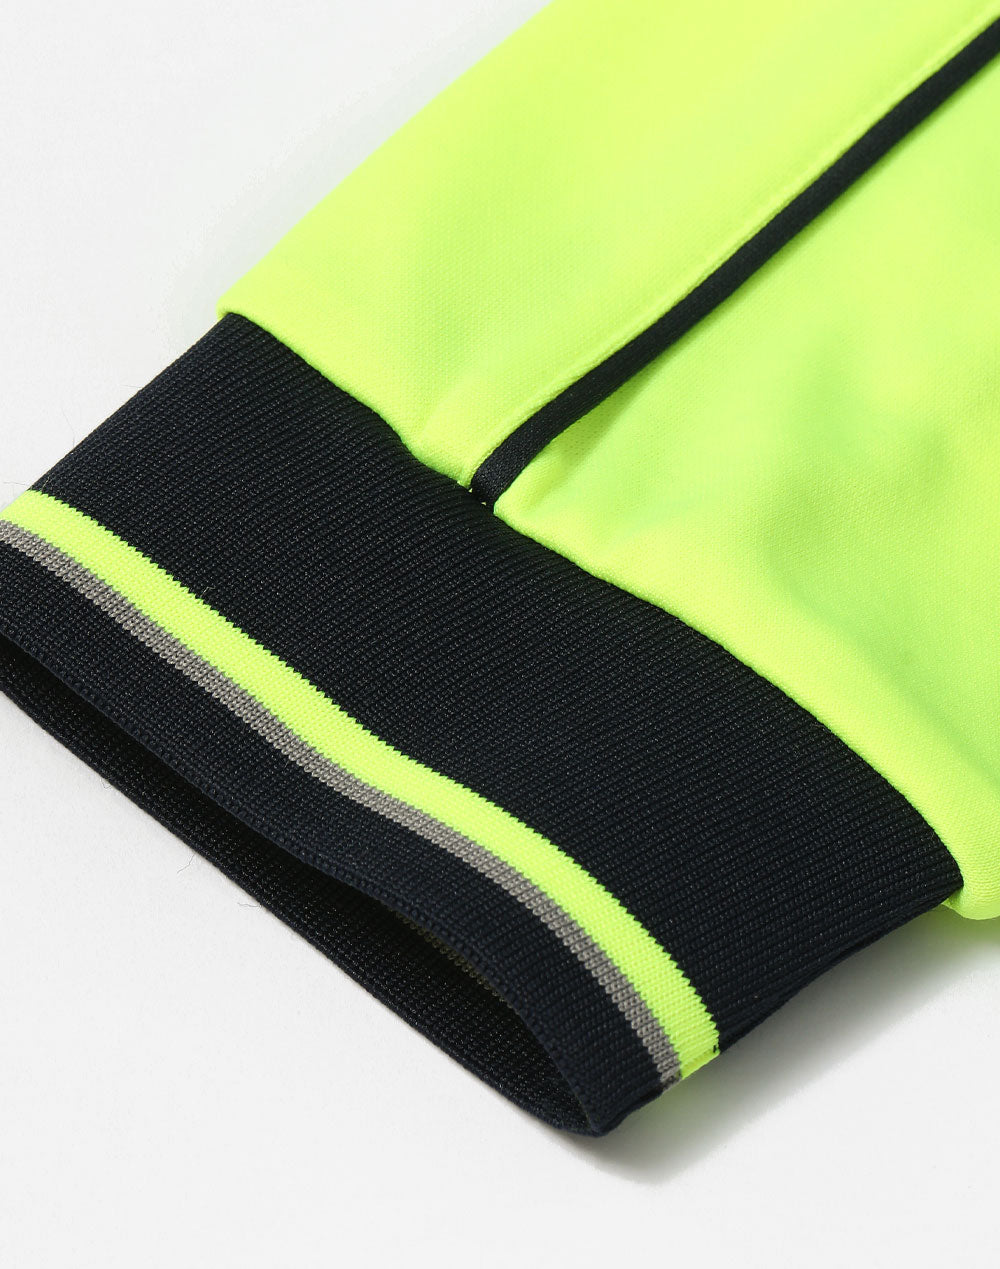 Winning Spirit - Hi Vis Sustainable Cool-Breeze Safety Polo - SW90